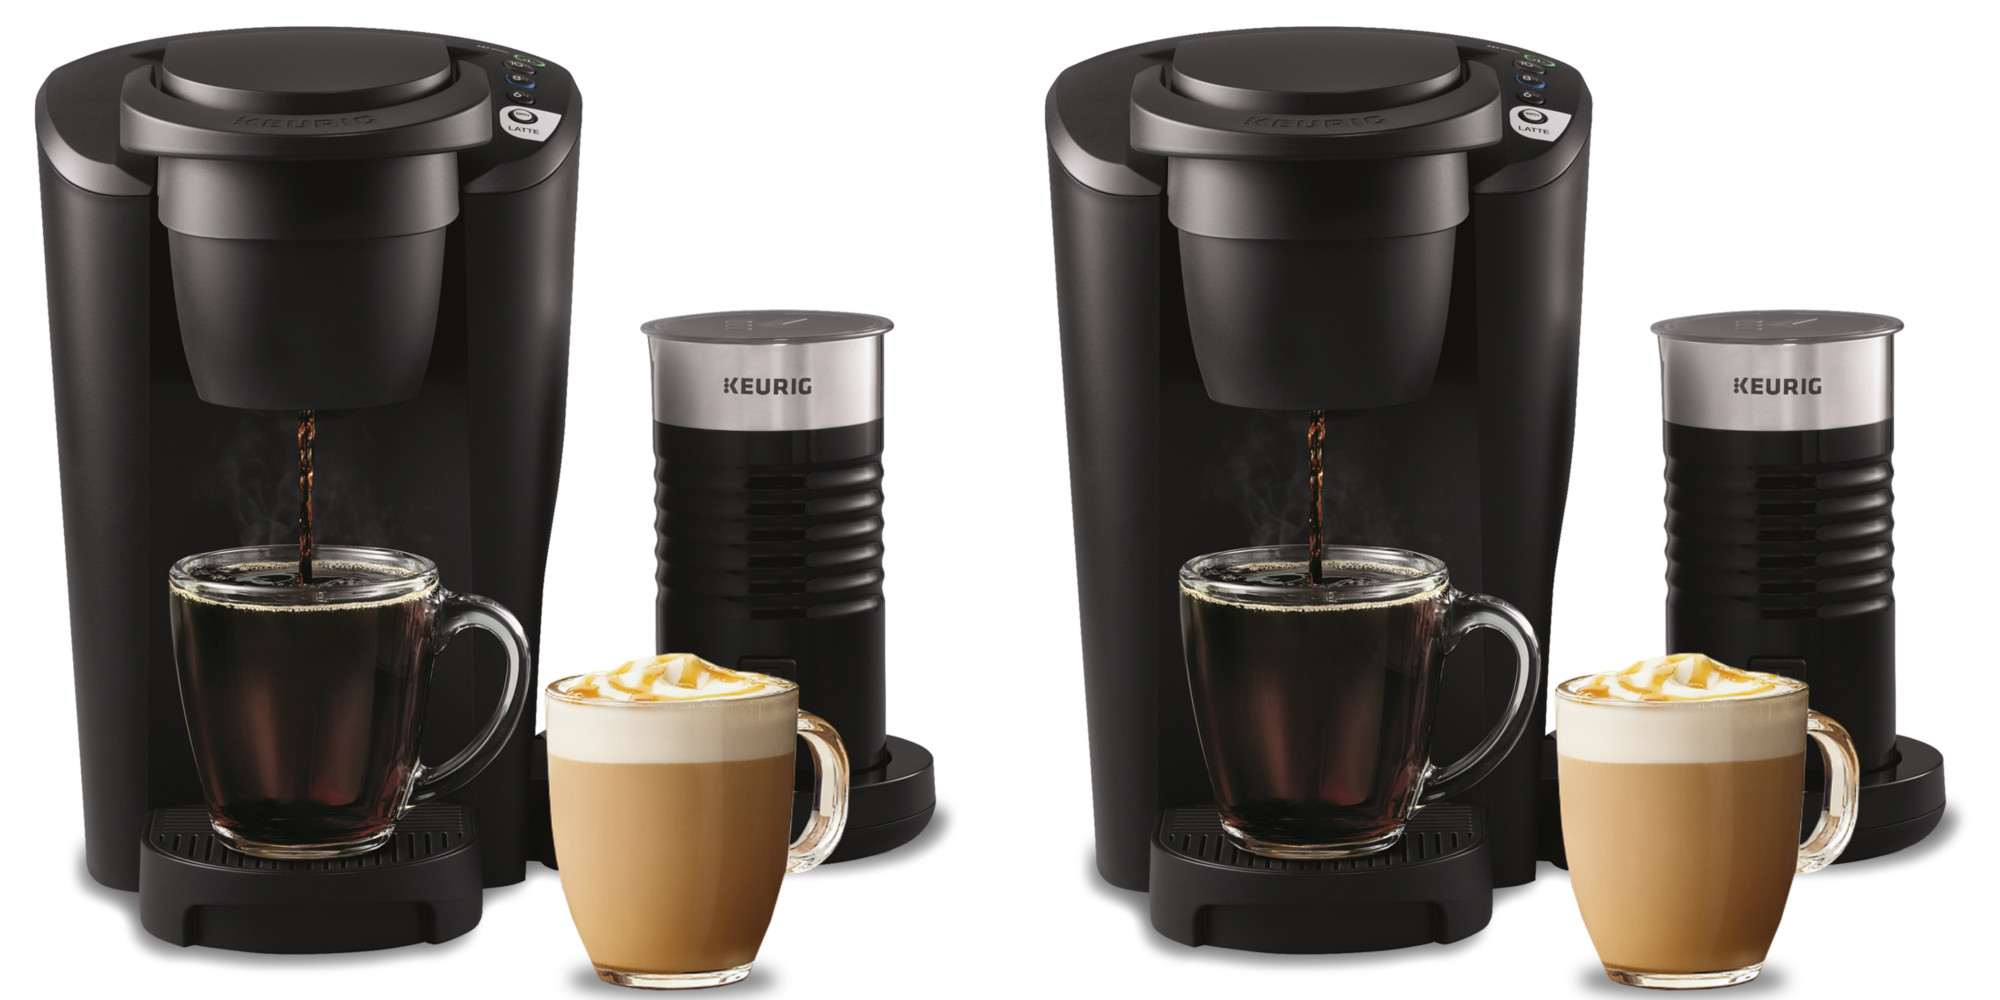 Wake up to a brand new lattemaking Keurig Coffee Brewer